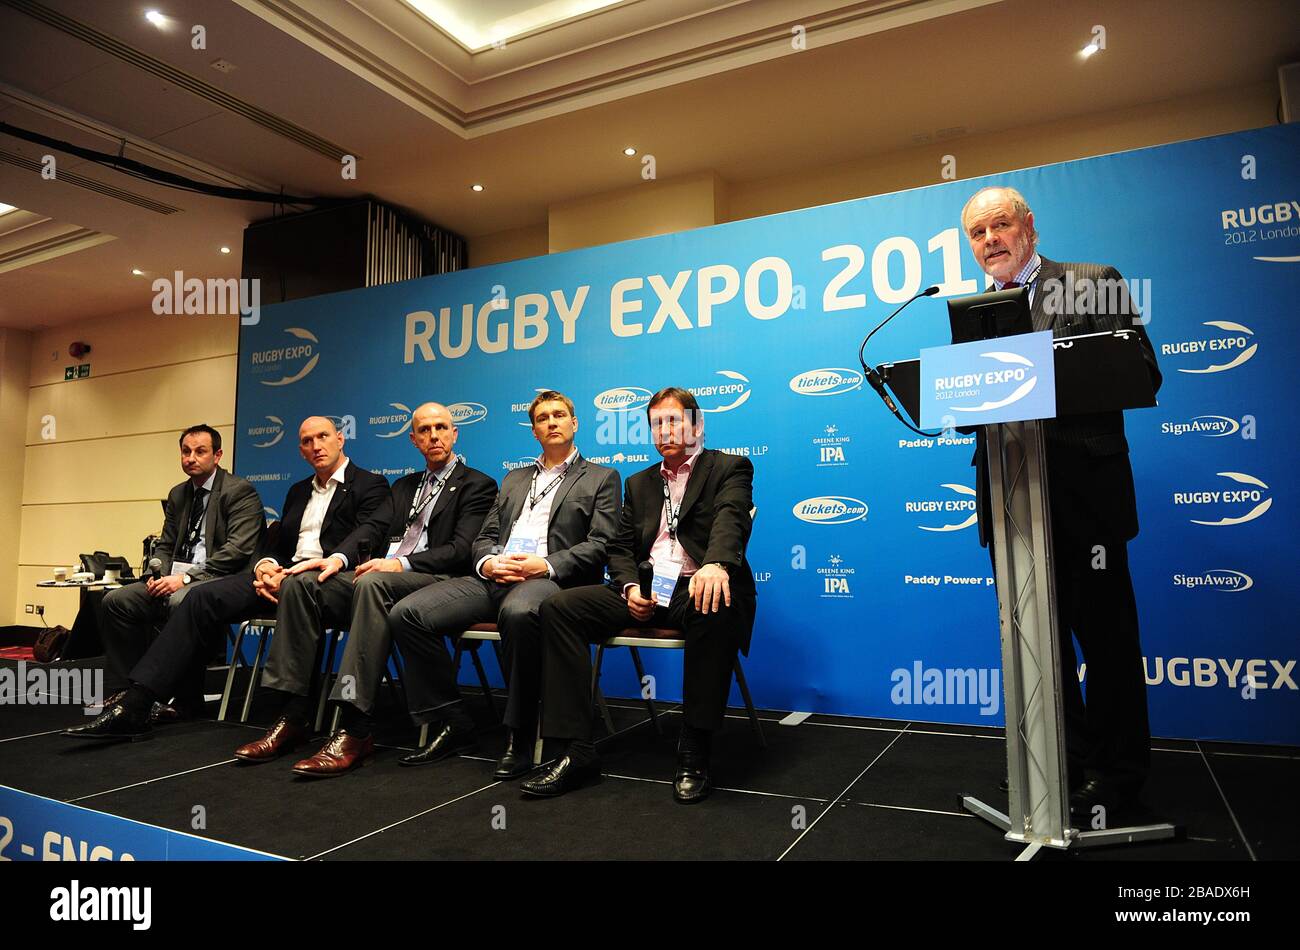 TalkSport's John Taylor (right) hosts a talk with (left to right) Head of Rugby Growth for the RFU Alistair Marks, Former England captain Lawrence Dallaglio, Mark Egan from the IRB, SRU's Nick Rennie and Mark Mccafferty from Premiership Rugby during Day Two of the Rugby Expo 2012 Stock Photo